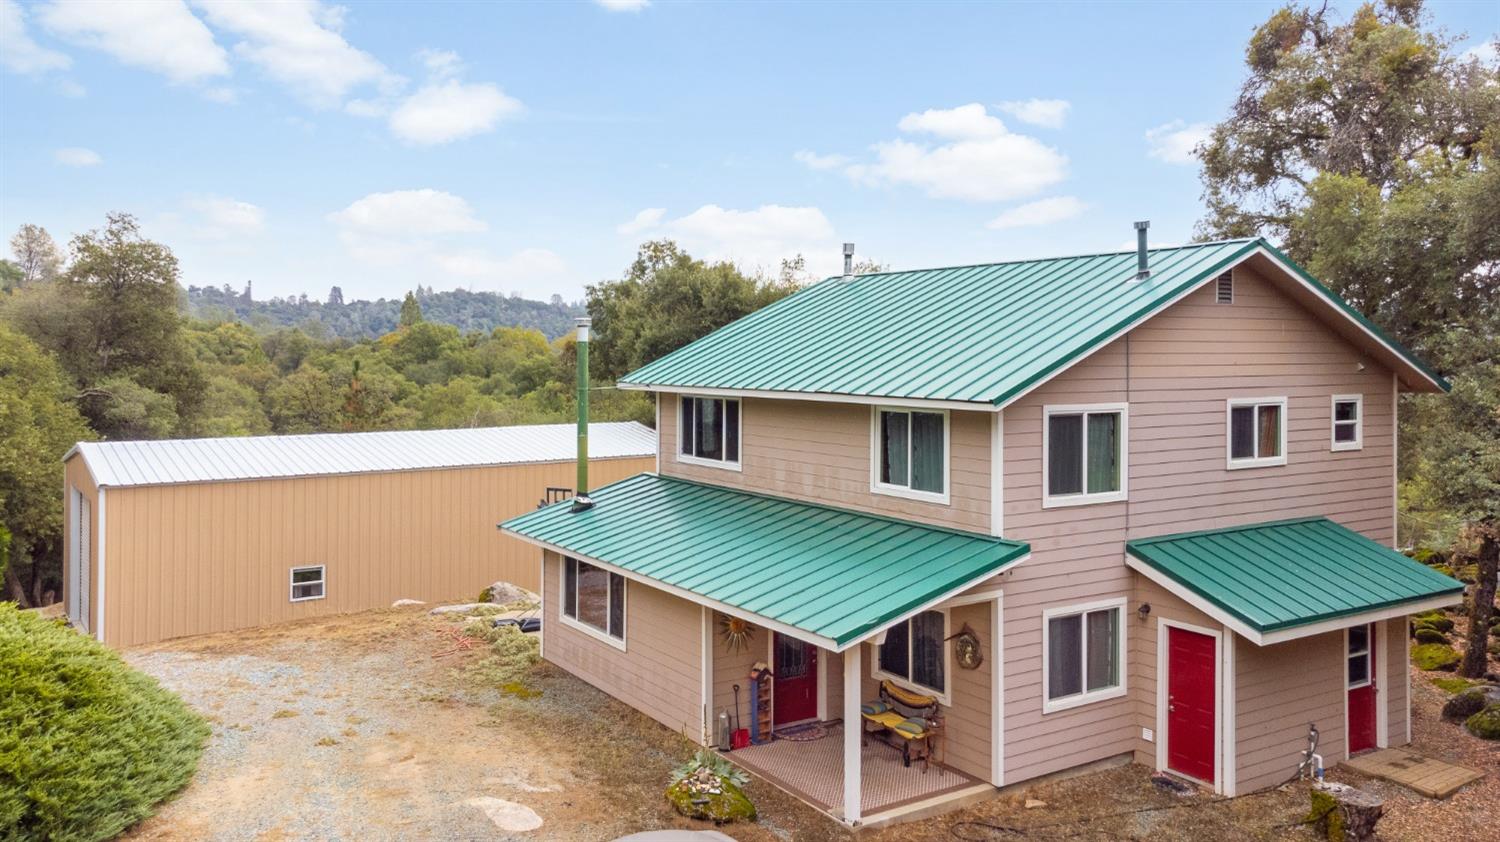 Photo of 2870 Sand Ridge Rd in Placerville, CA